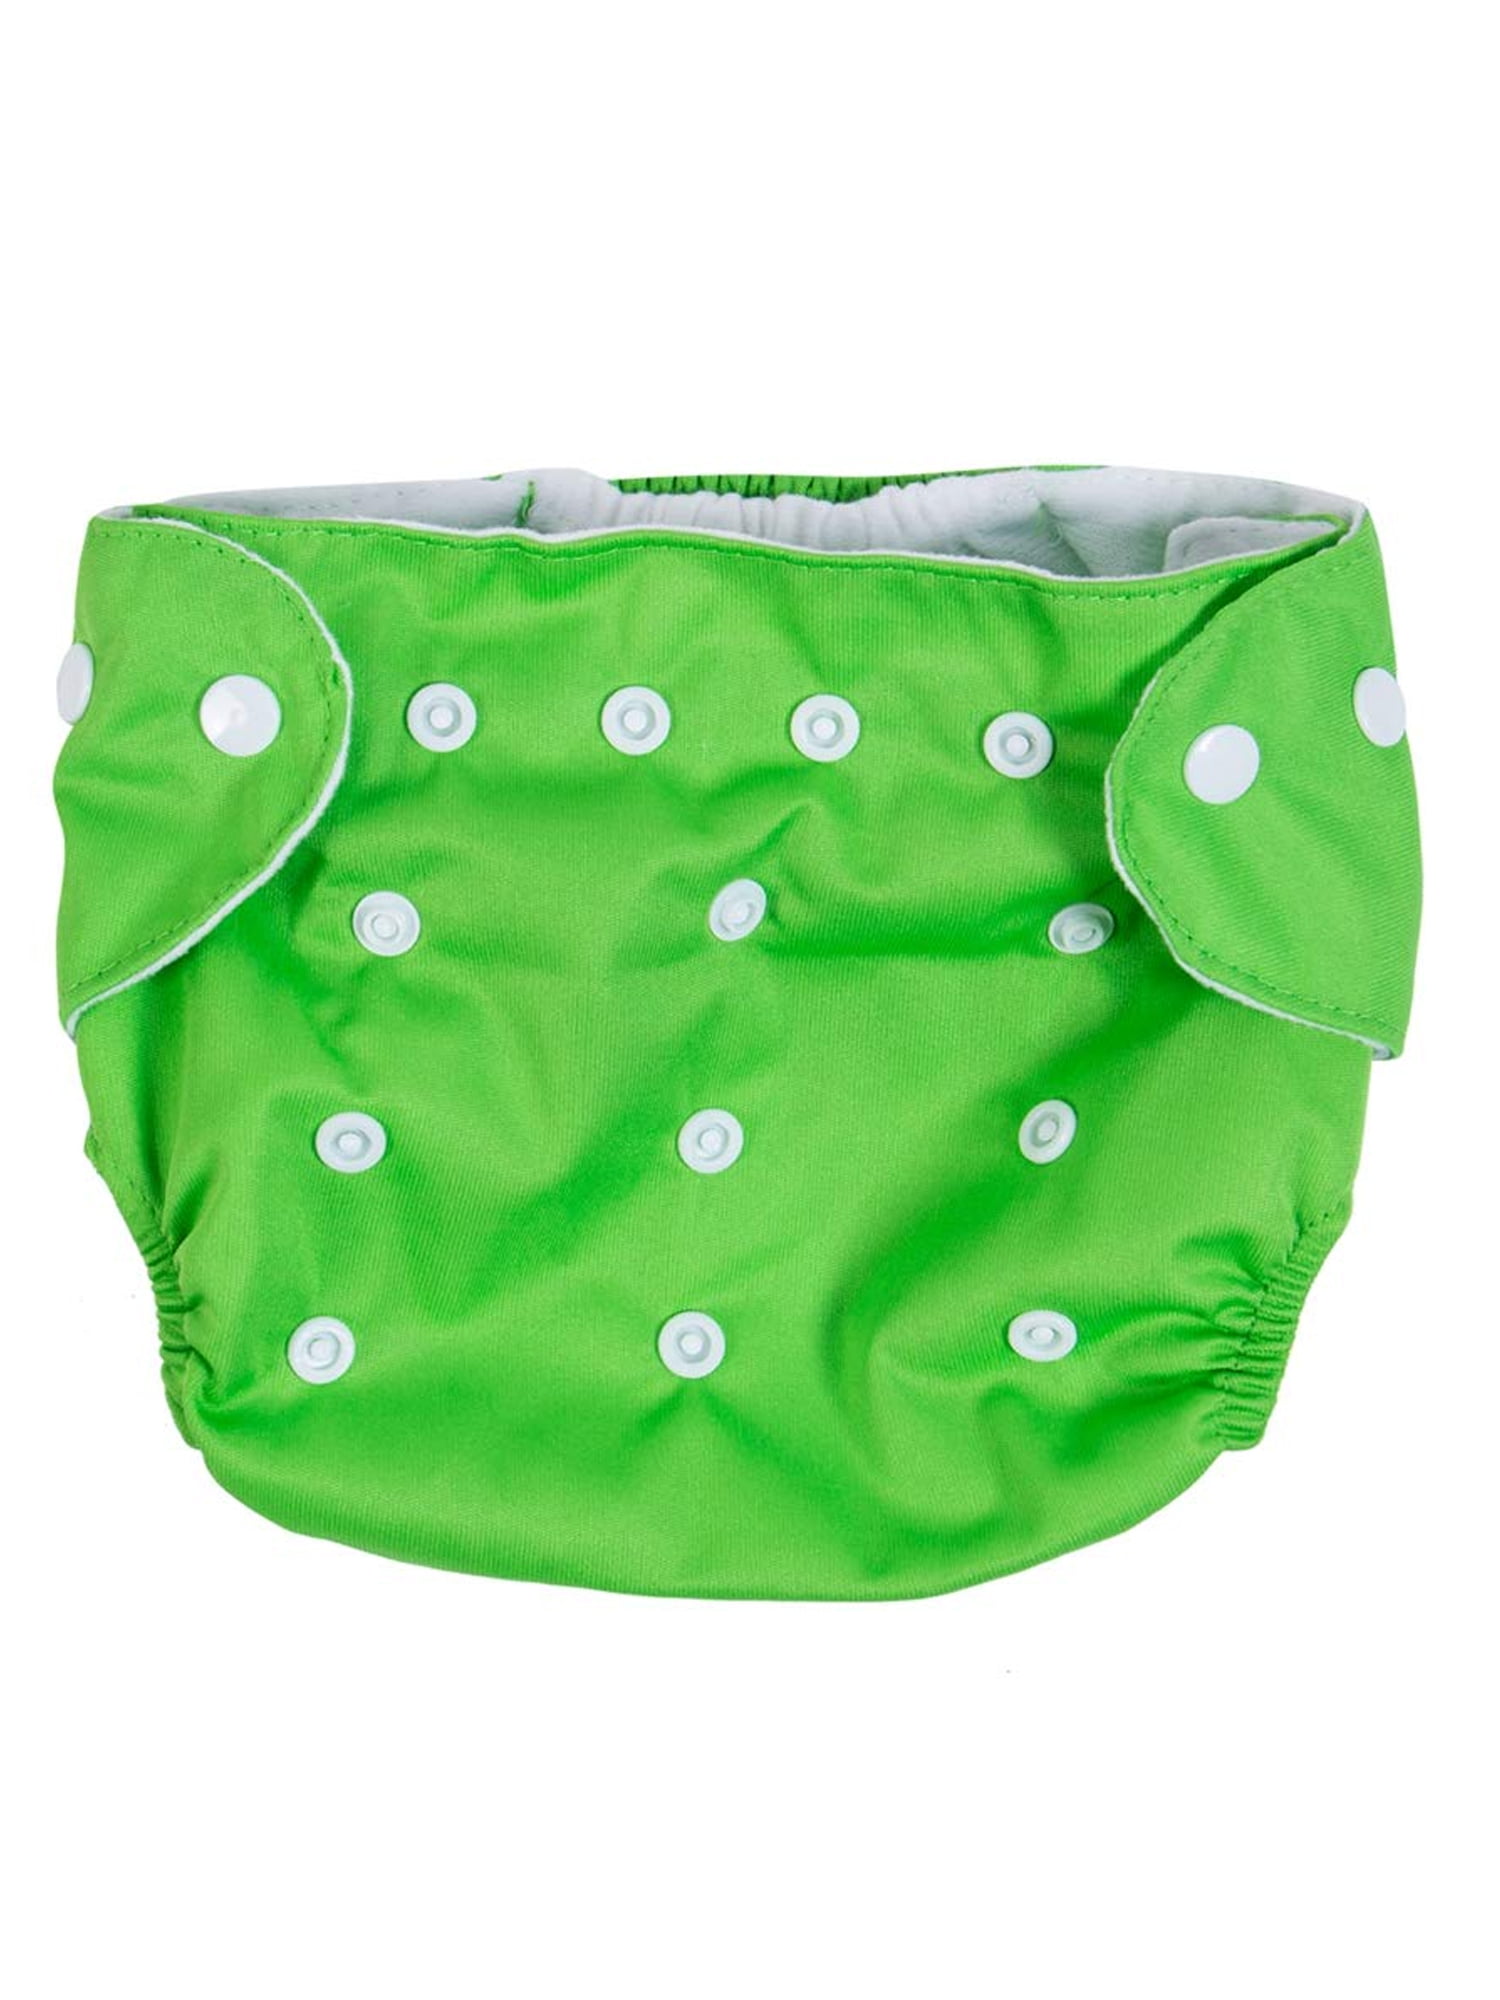 For Newborn Infant Reusable Washable Baby Cloth Diapers Nappy Cover Adjustable 